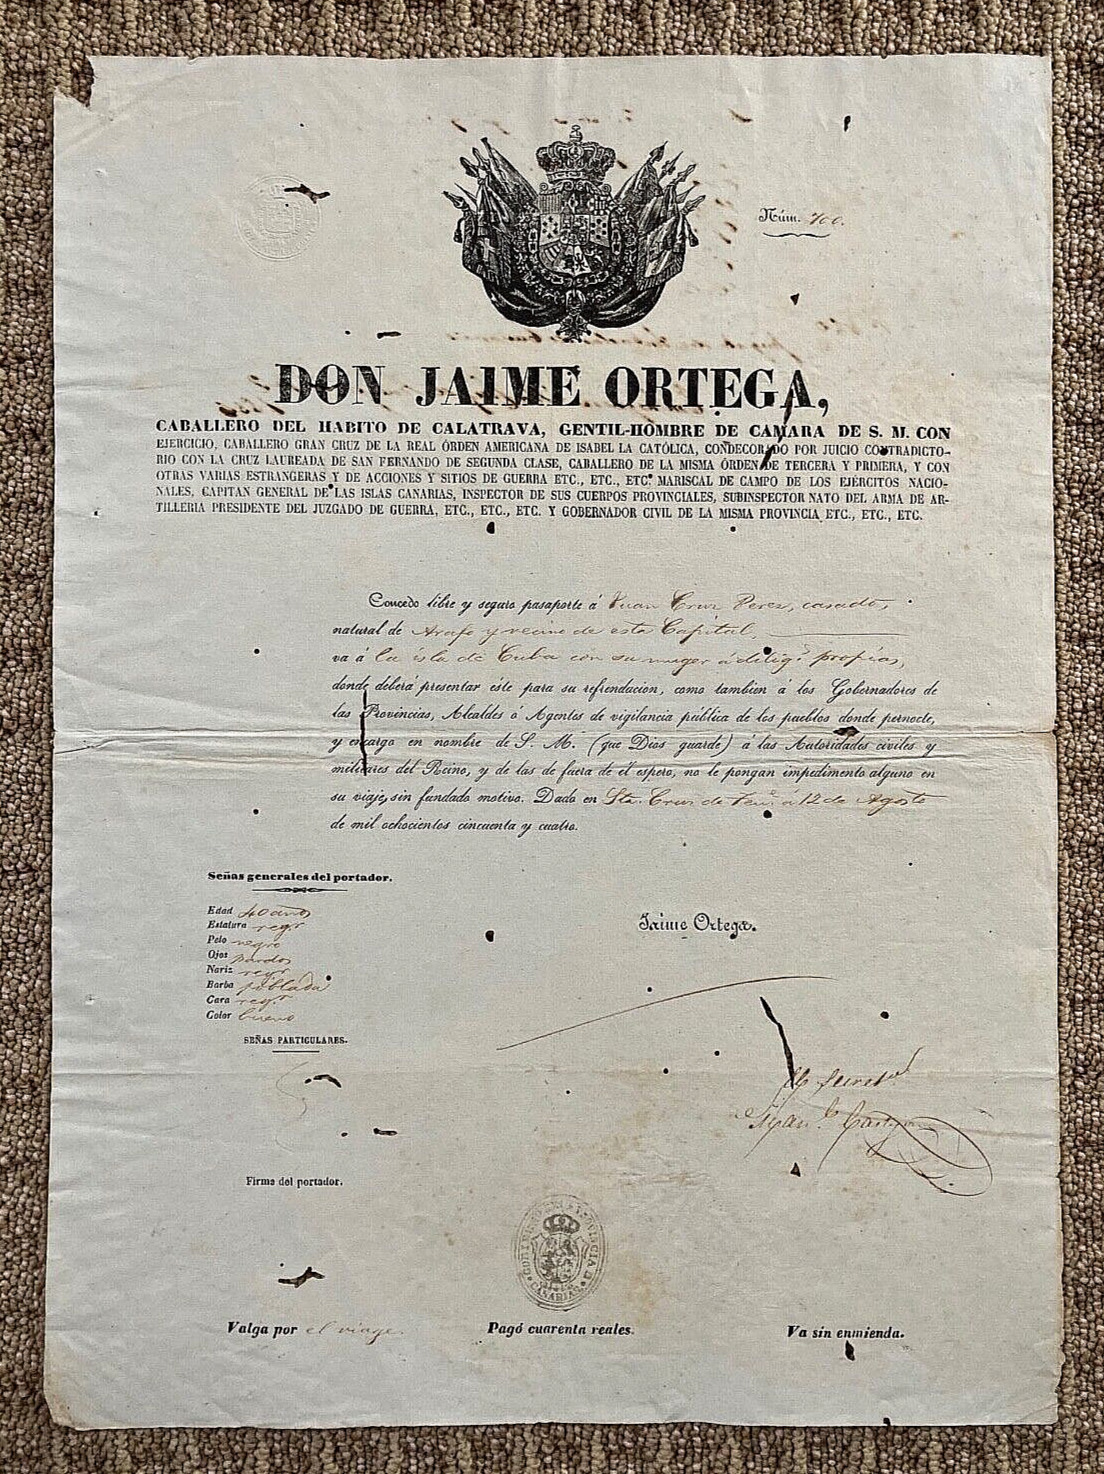 TRAVEL ID by GENERAL JAIME ORTEGA'S OFFICE - CANARY ISLAND  to CUBA SEP 2, 1836